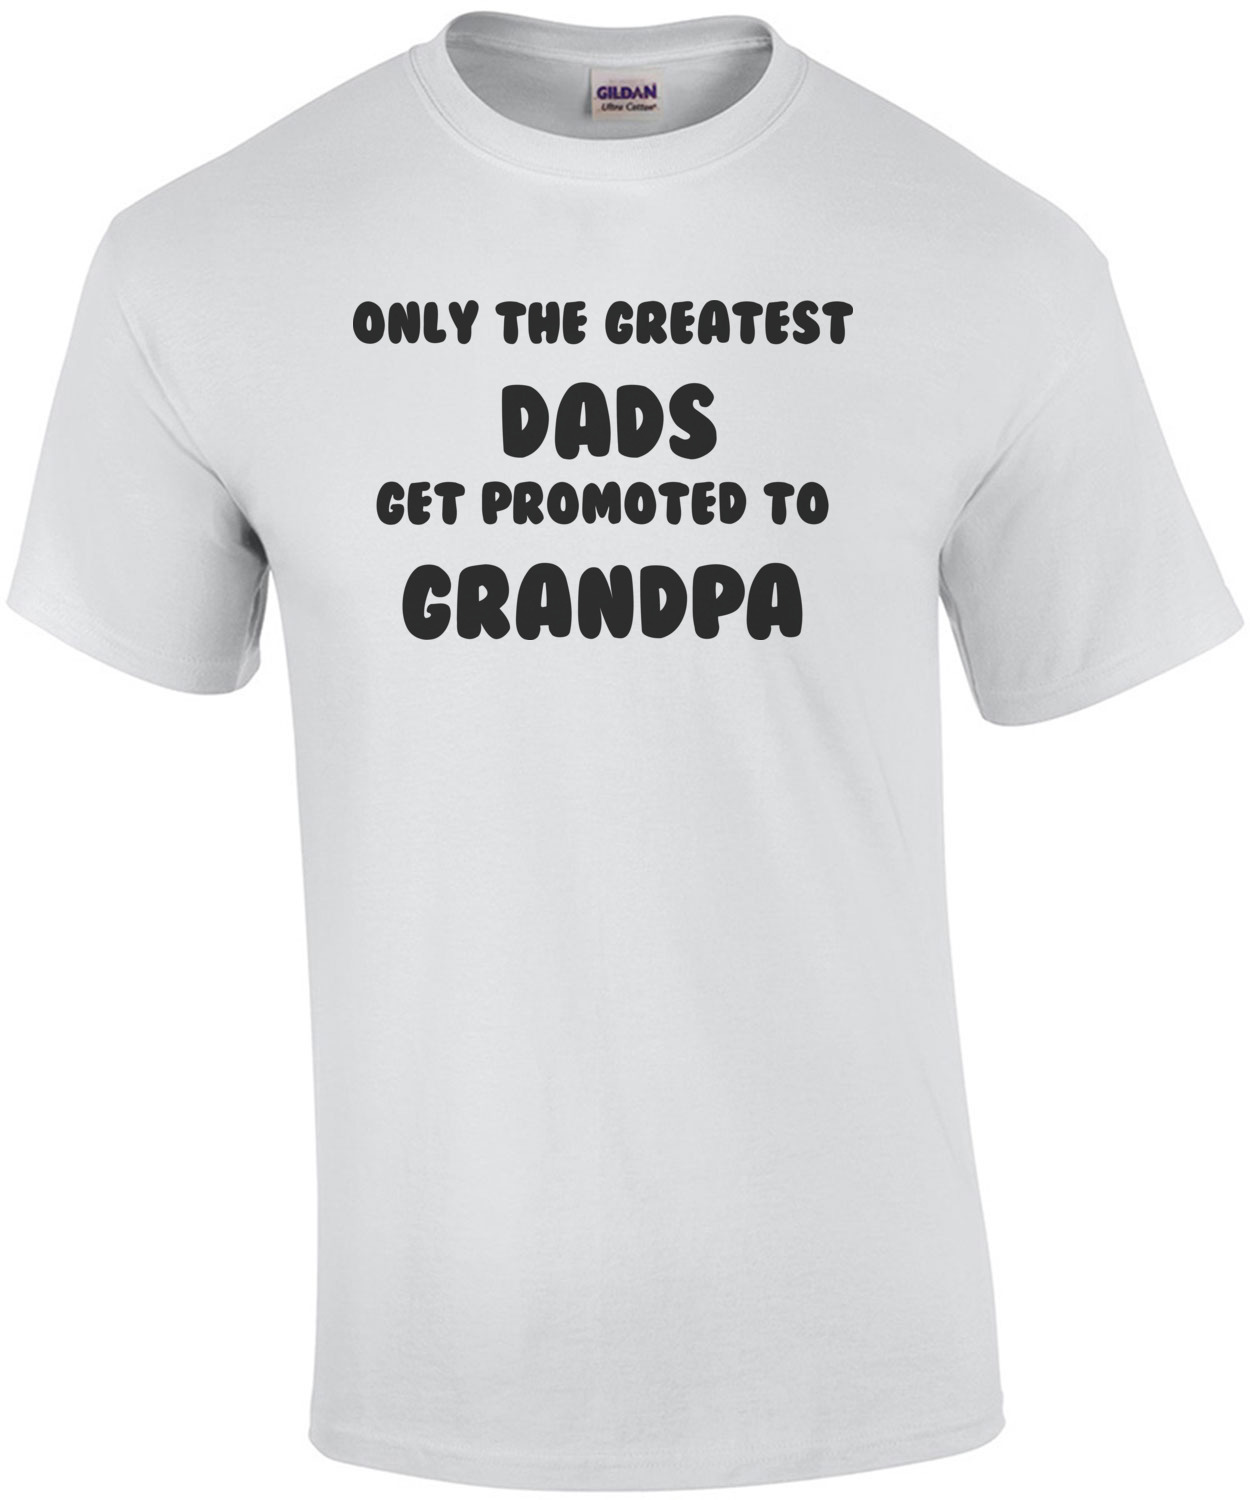 Only the Greatest Dads Get Promoted to Grandpa shirt